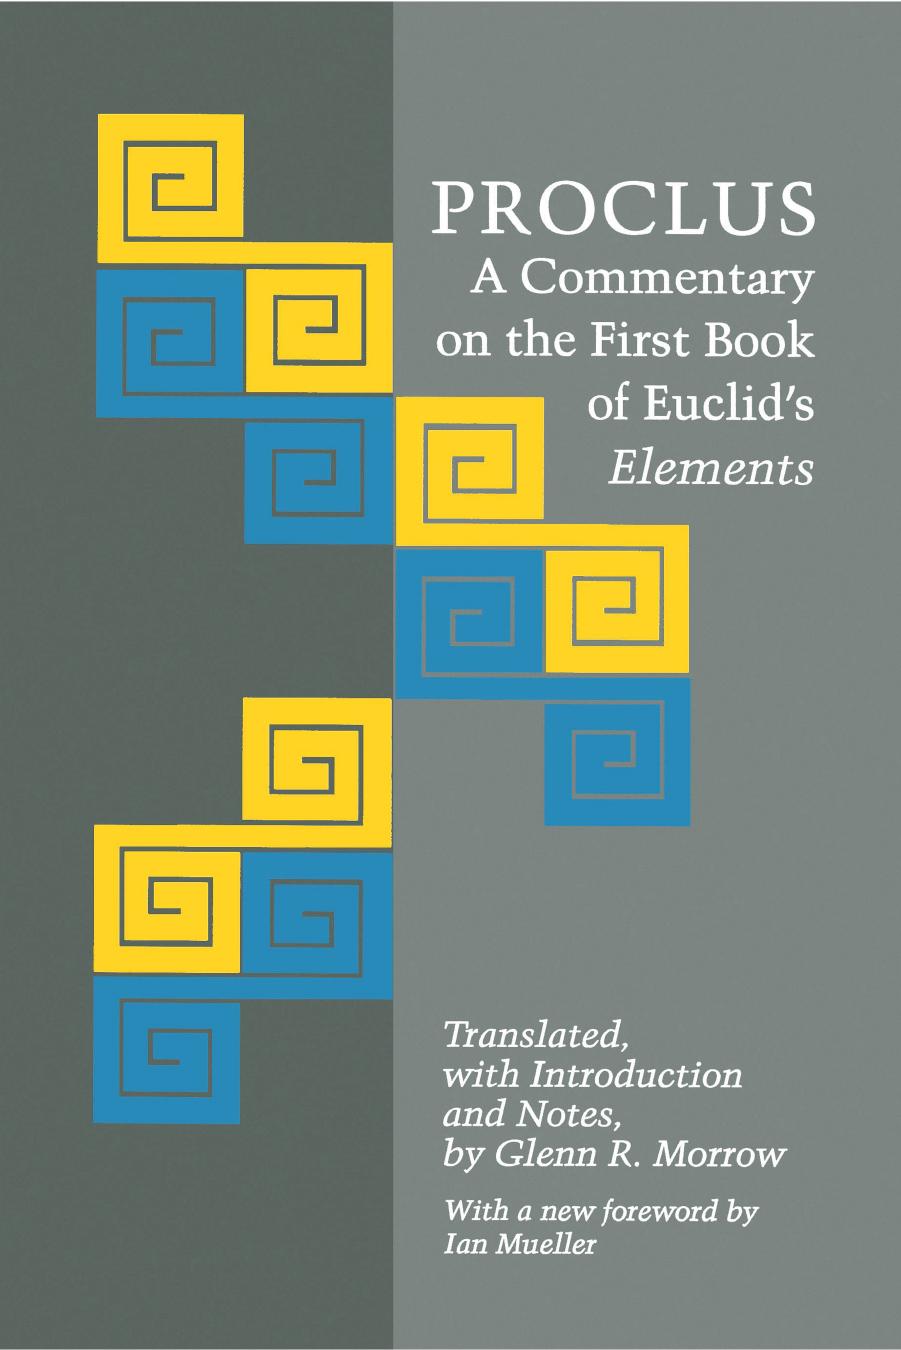 Proclus a Commentary on the First Book of Euclid's Elements by Glenn R. Morrow